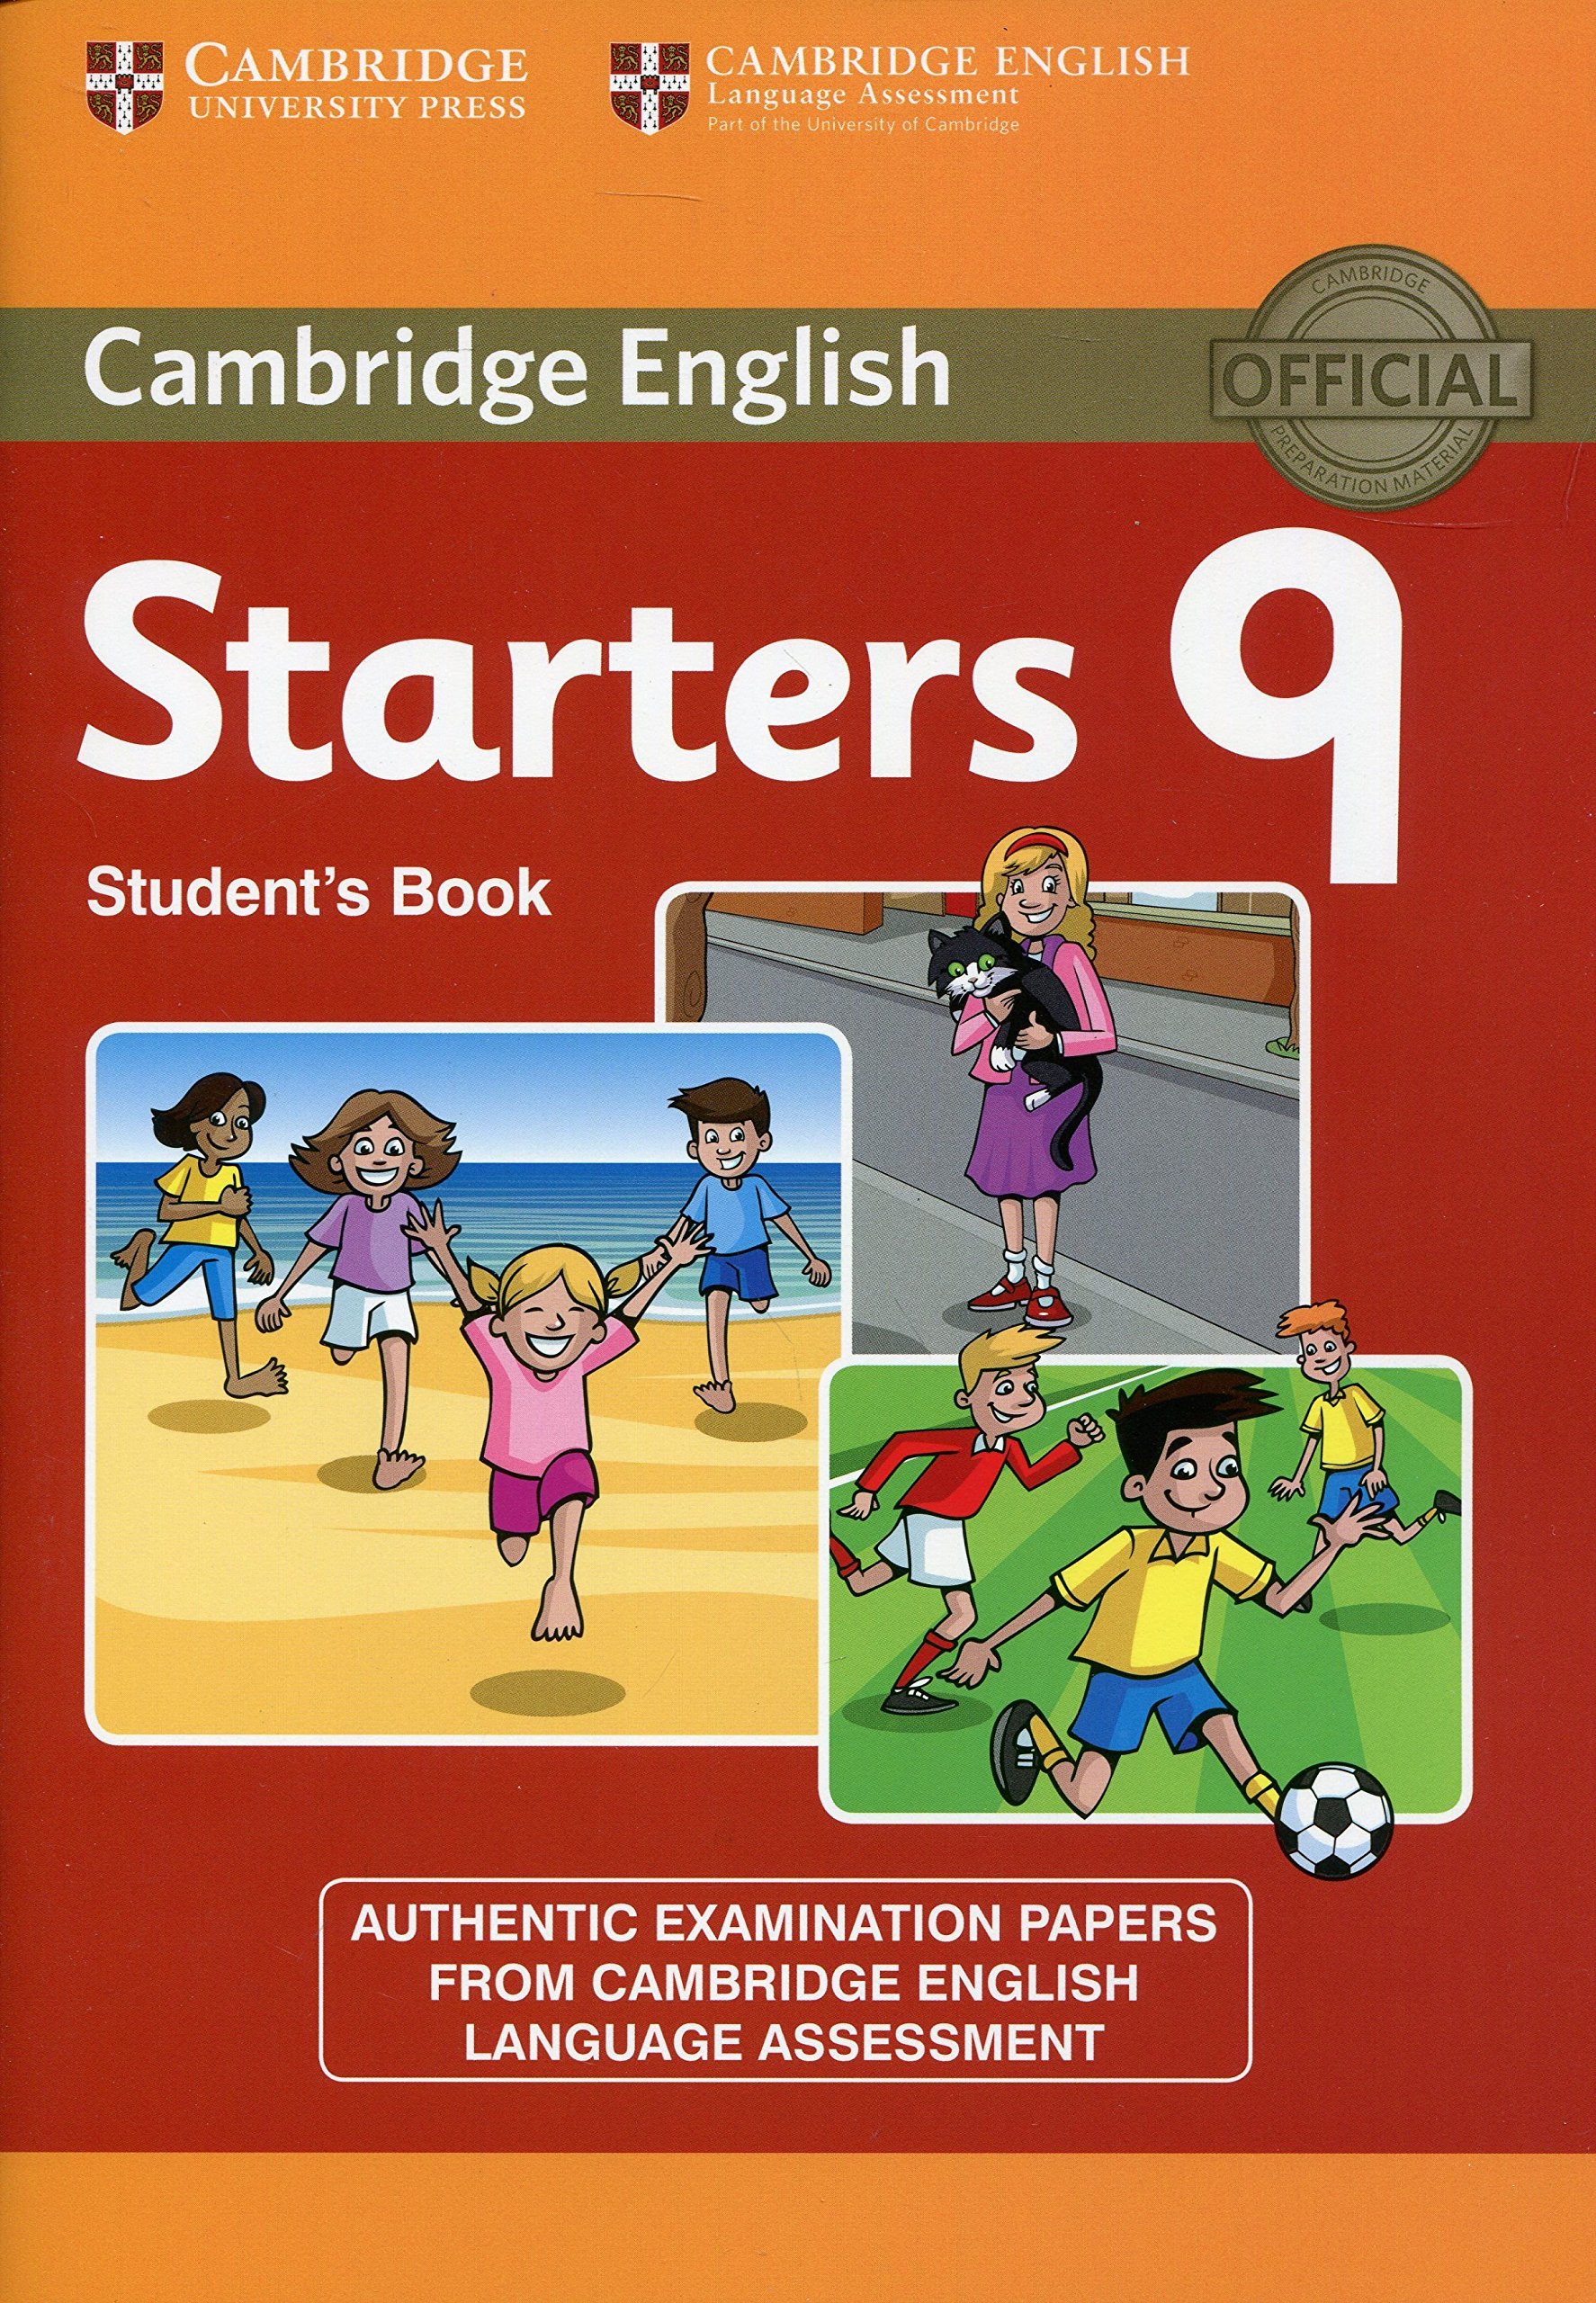 Language　Language　Young　Learners　English　English　Book:　Cambridge　Papers　Cambridge　Assessment　Student's　Cambridge　from　English　Examination　Authentic　Starters　Assessment